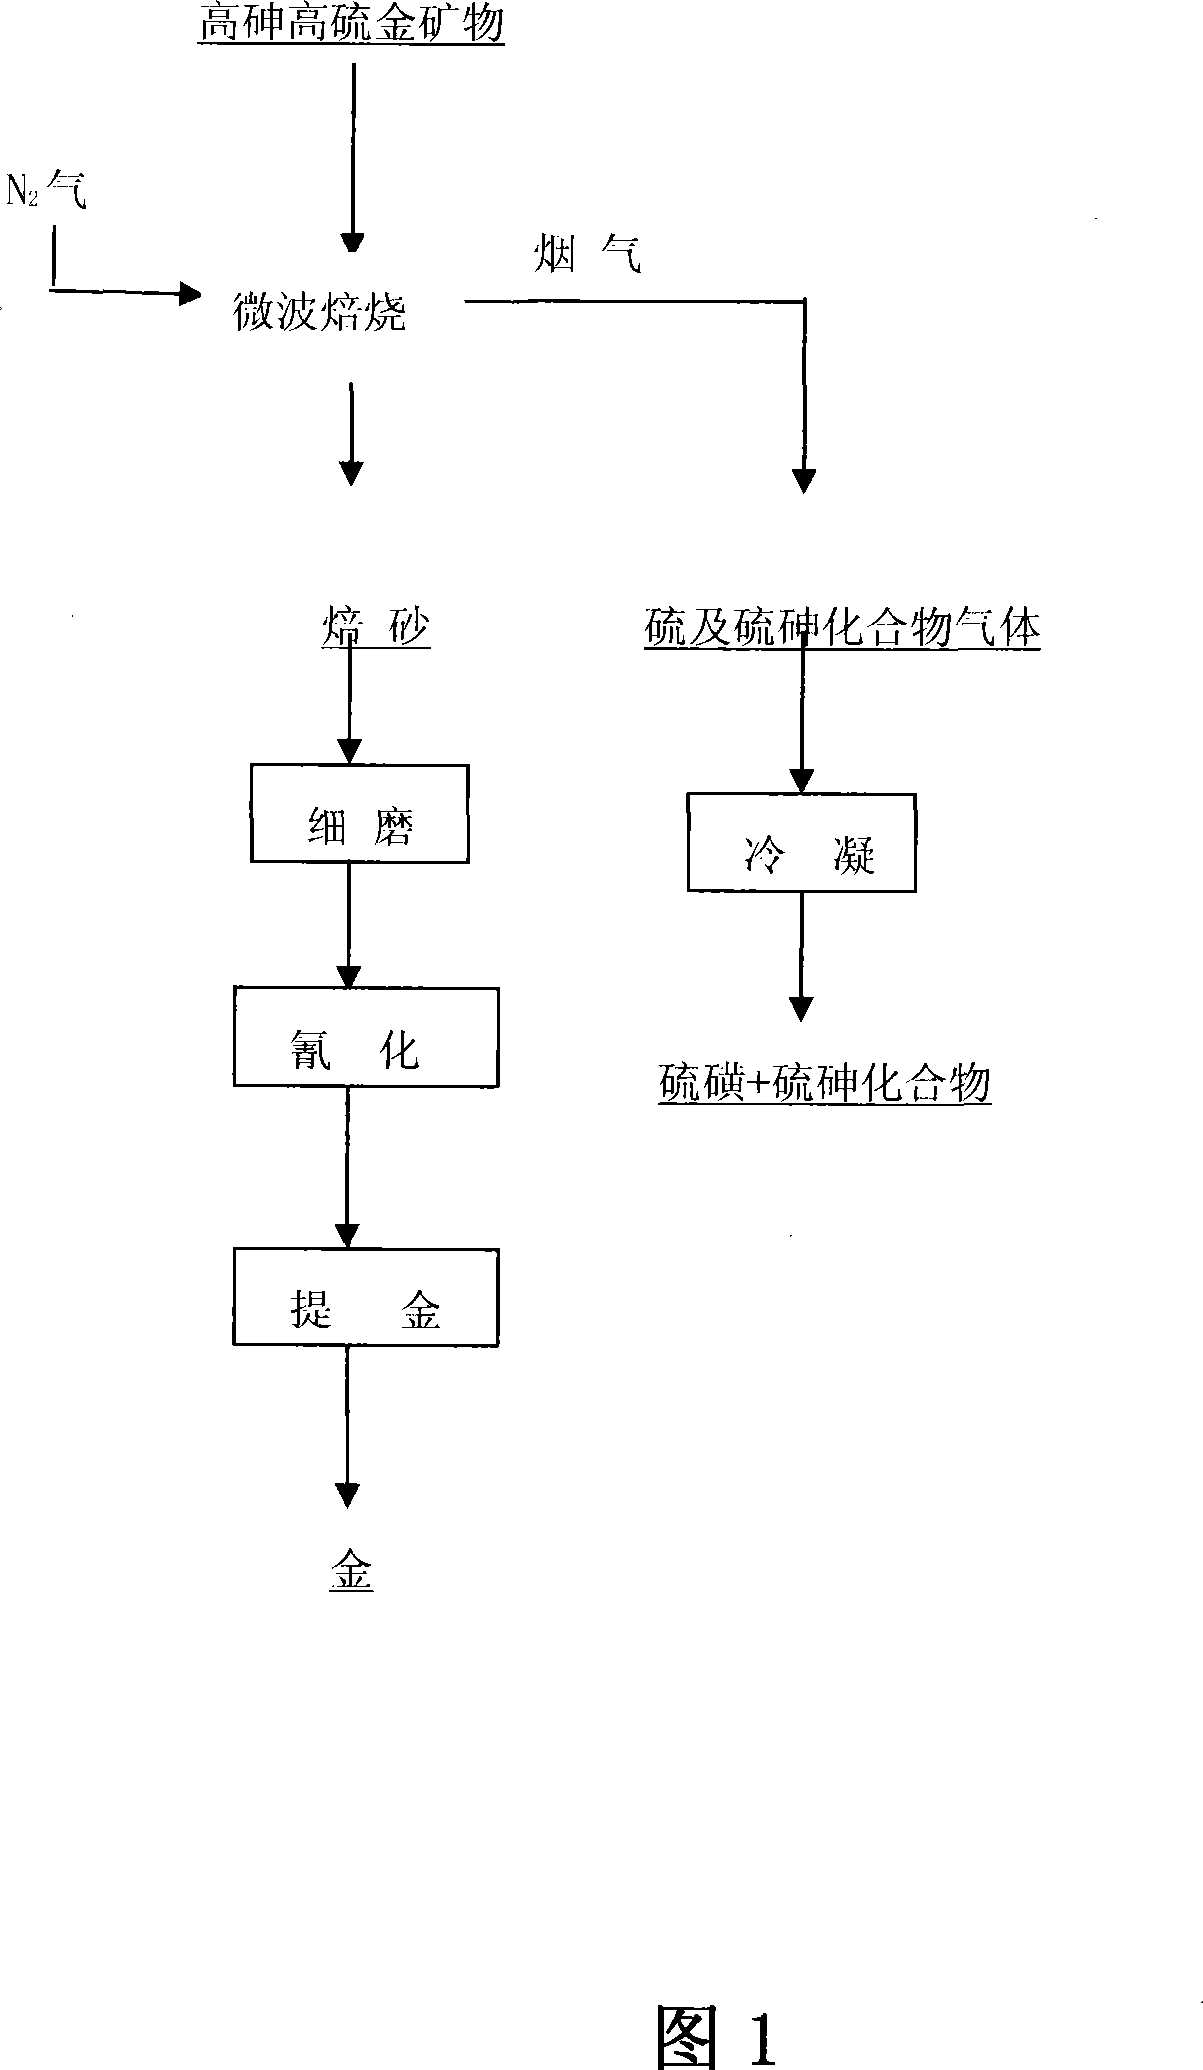 Method for pretreating refractory gold ore by employing microwave calcining